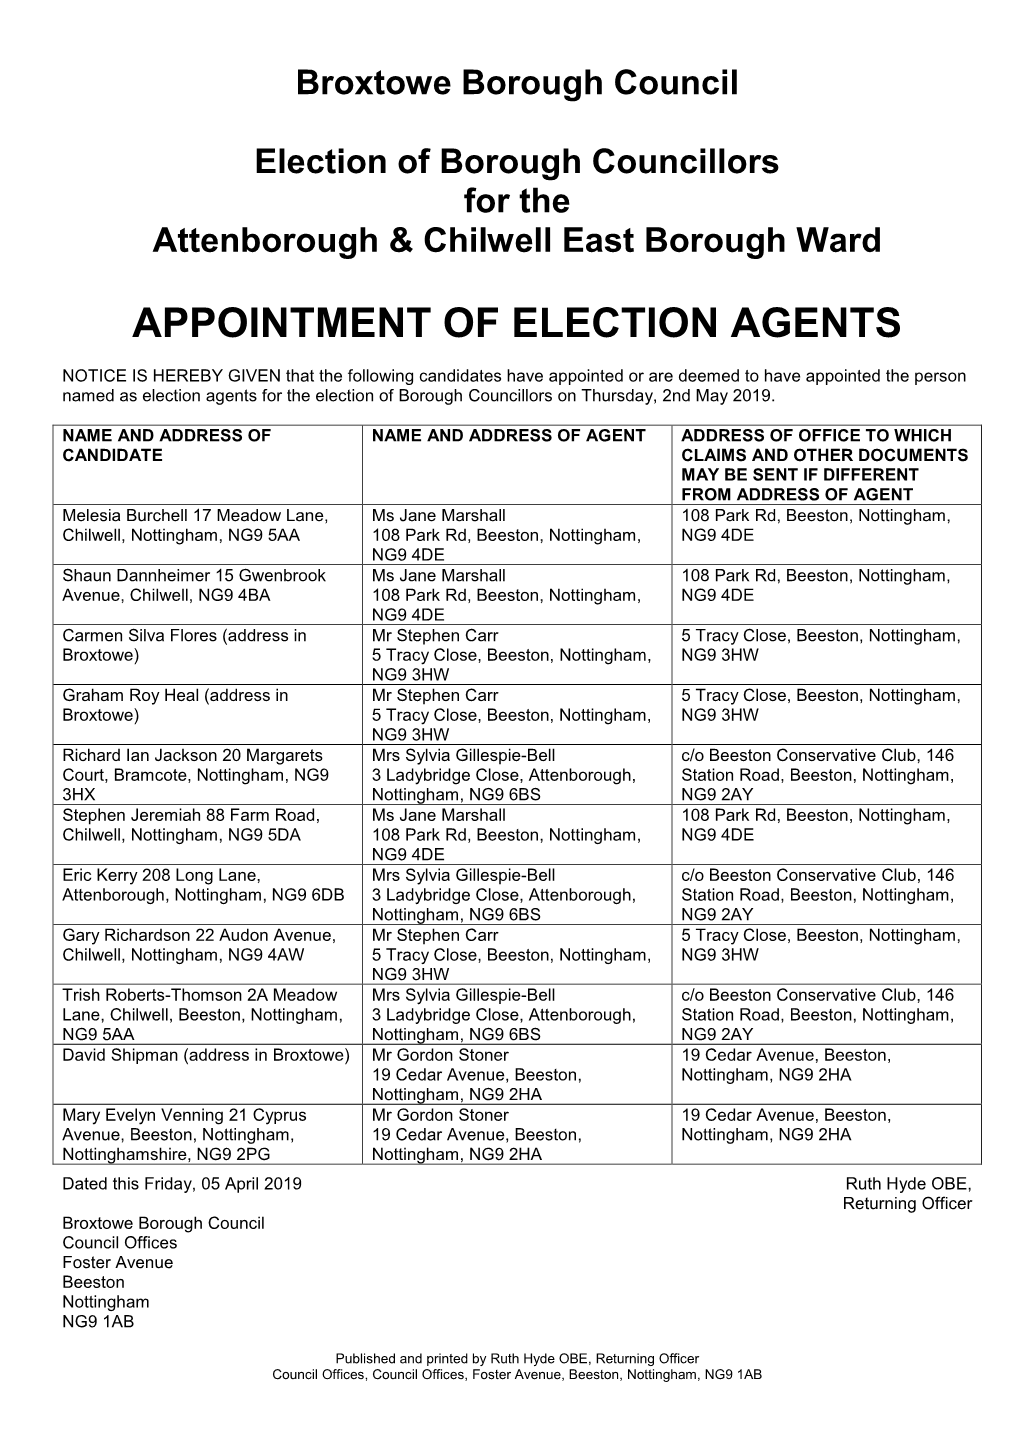 Appointment of Election Agents